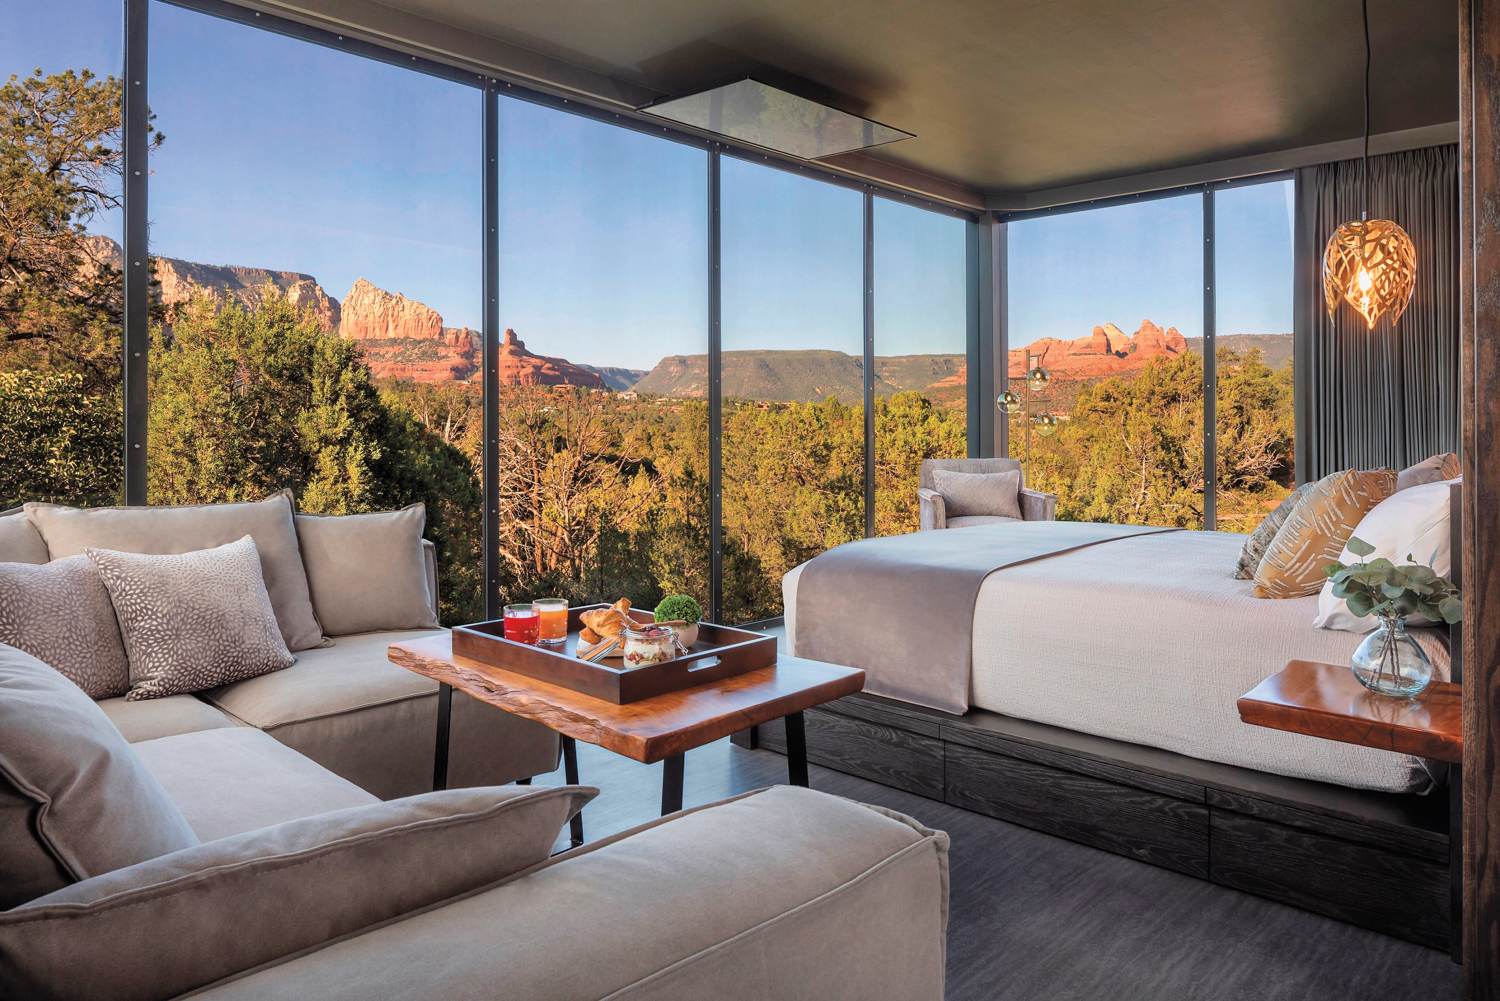 Ambiente Hotel room with floor-to-ceiling windows overlooking trees and red rock mountains